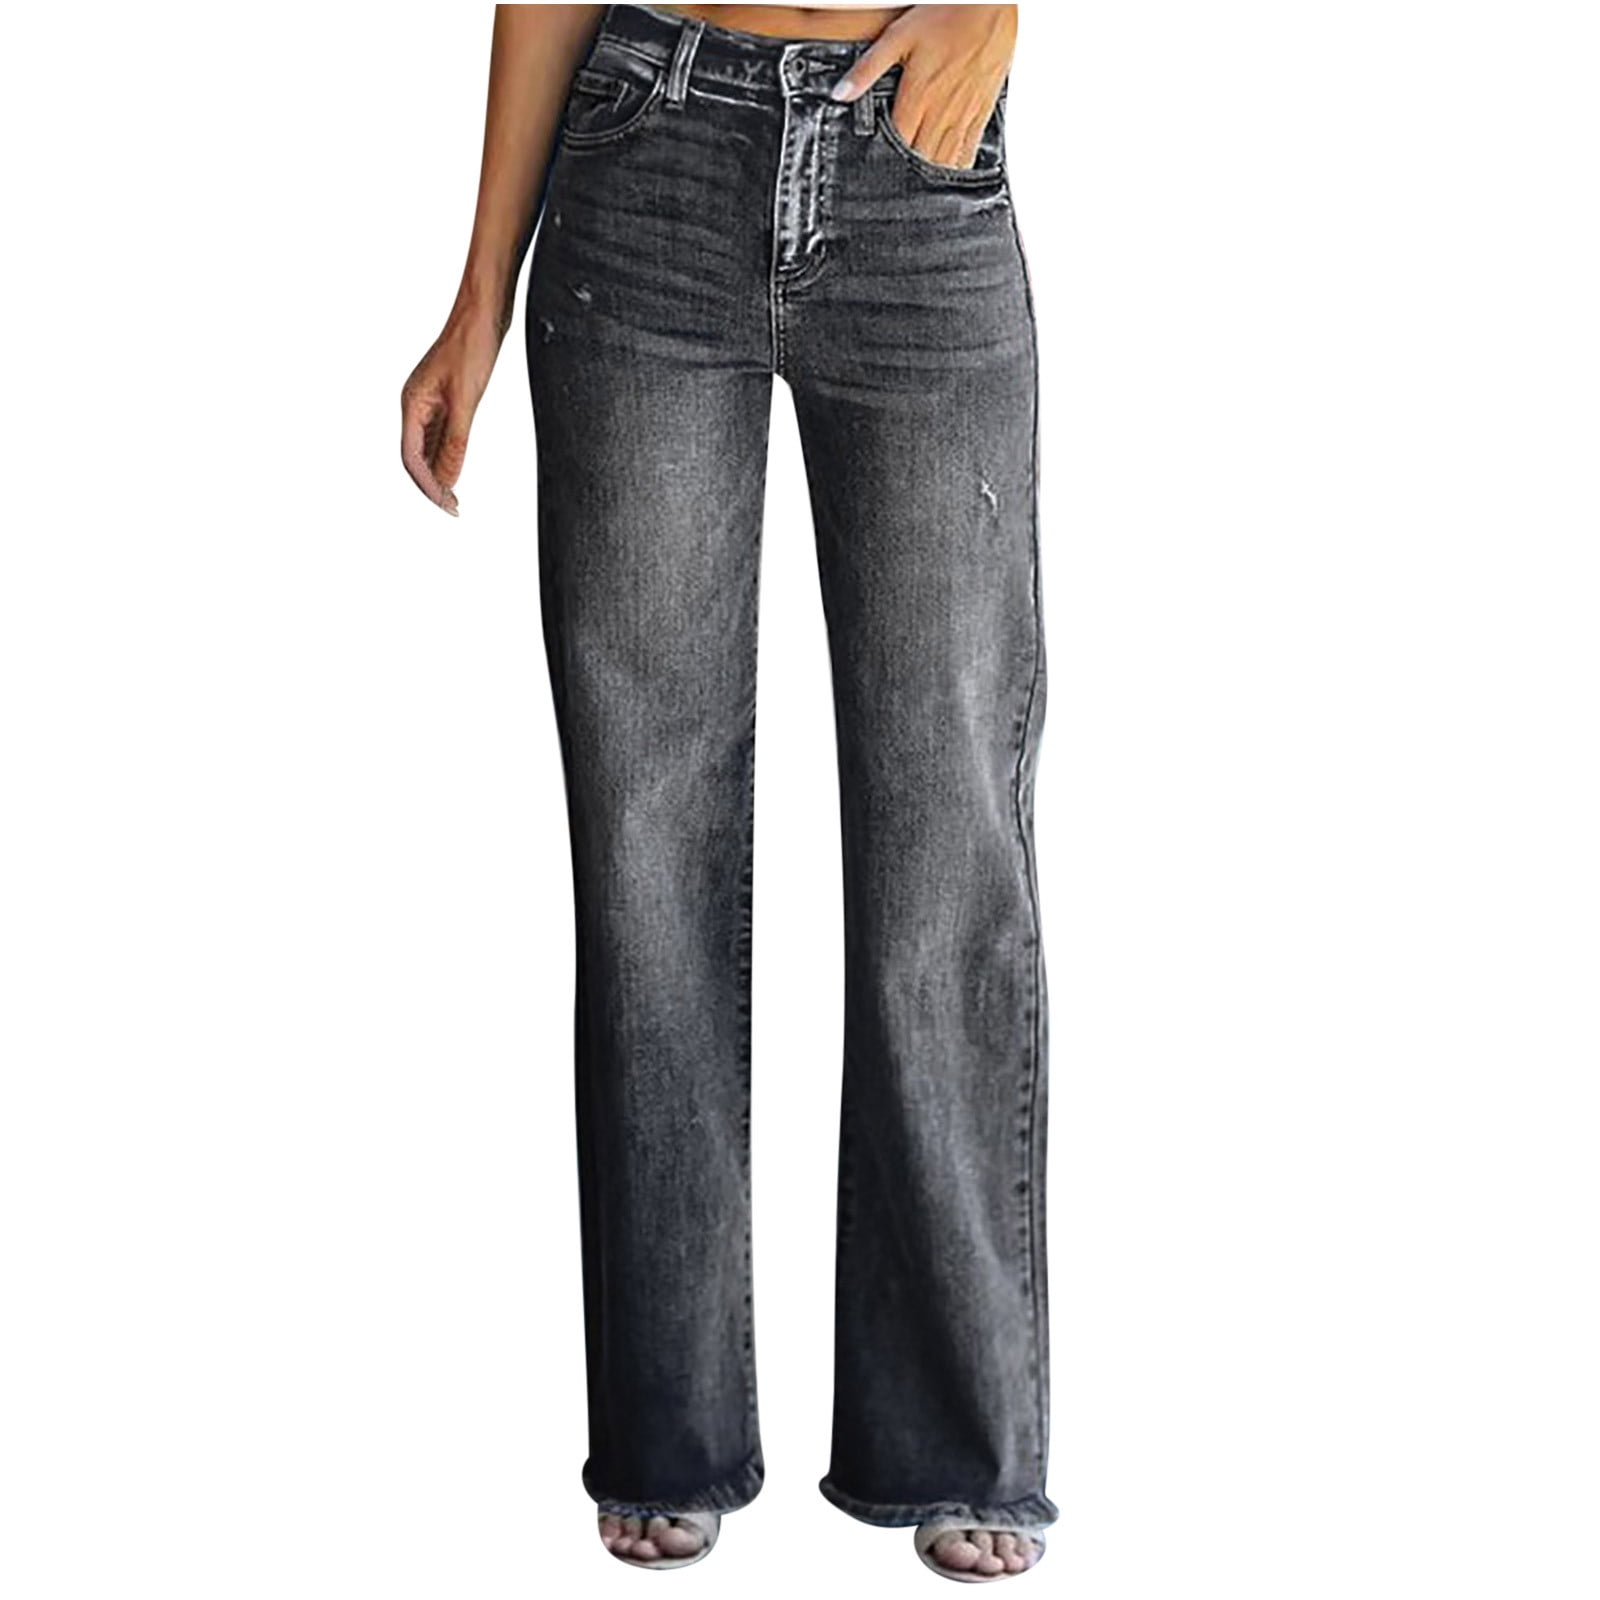 pbnbp Low Rise Jeans for Women Plus Size Stretch Skinny Frayed Raw